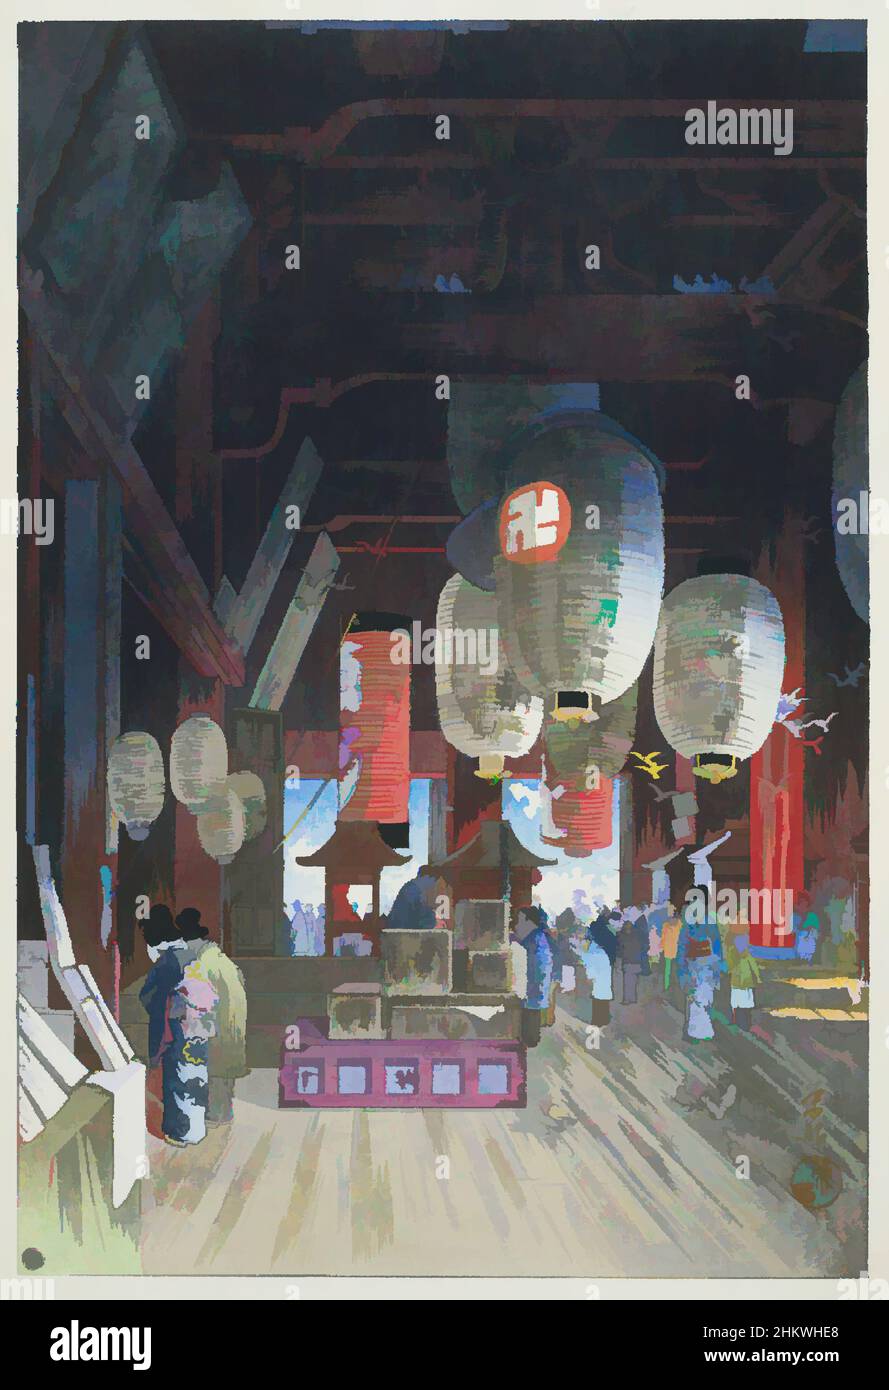 Art inspired by In the Kannon temple in Asakusa, Asakusa Kannon no naido, Interior of the wooden Kannon temple in Asakusa with visitors, pigeons and on the ceiling large lanterns., print maker: Narazaki Eisho, publisher: Watanabe Shôzaburô, print maker: Japan, publisher: Tokyo, 1932, Classic works modernized by Artotop with a splash of modernity. Shapes, color and value, eye-catching visual impact on art. Emotions through freedom of artworks in a contemporary way. A timeless message pursuing a wildly creative new direction. Artists turning to the digital medium and creating the Artotop NFT Stock Photo